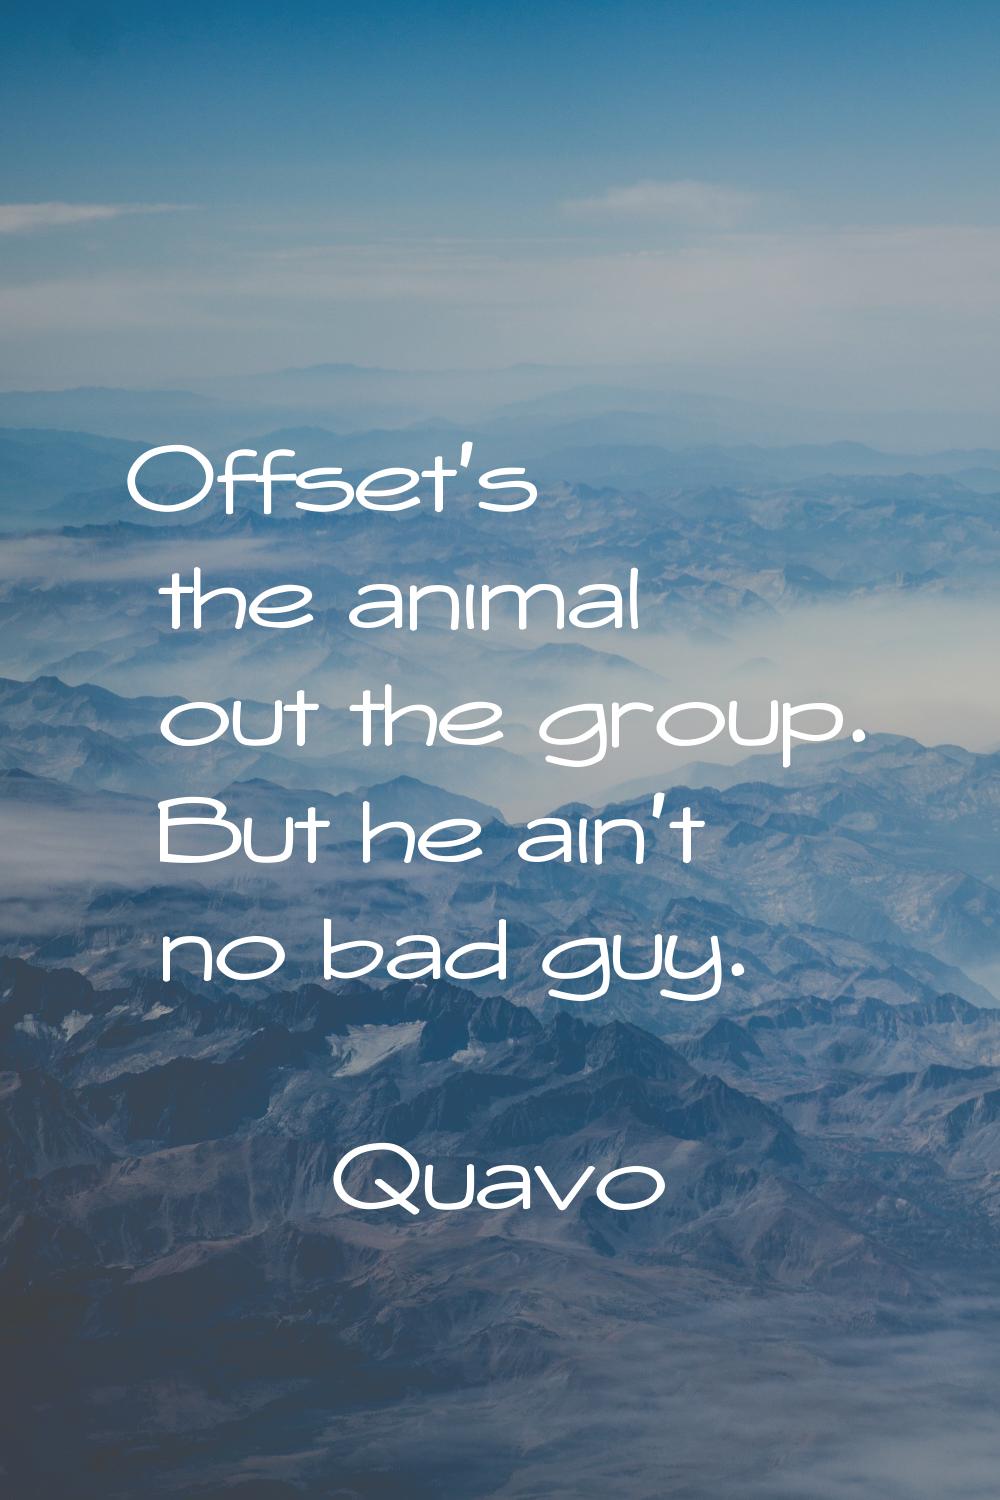 Offset's the animal out the group. But he ain't no bad guy.